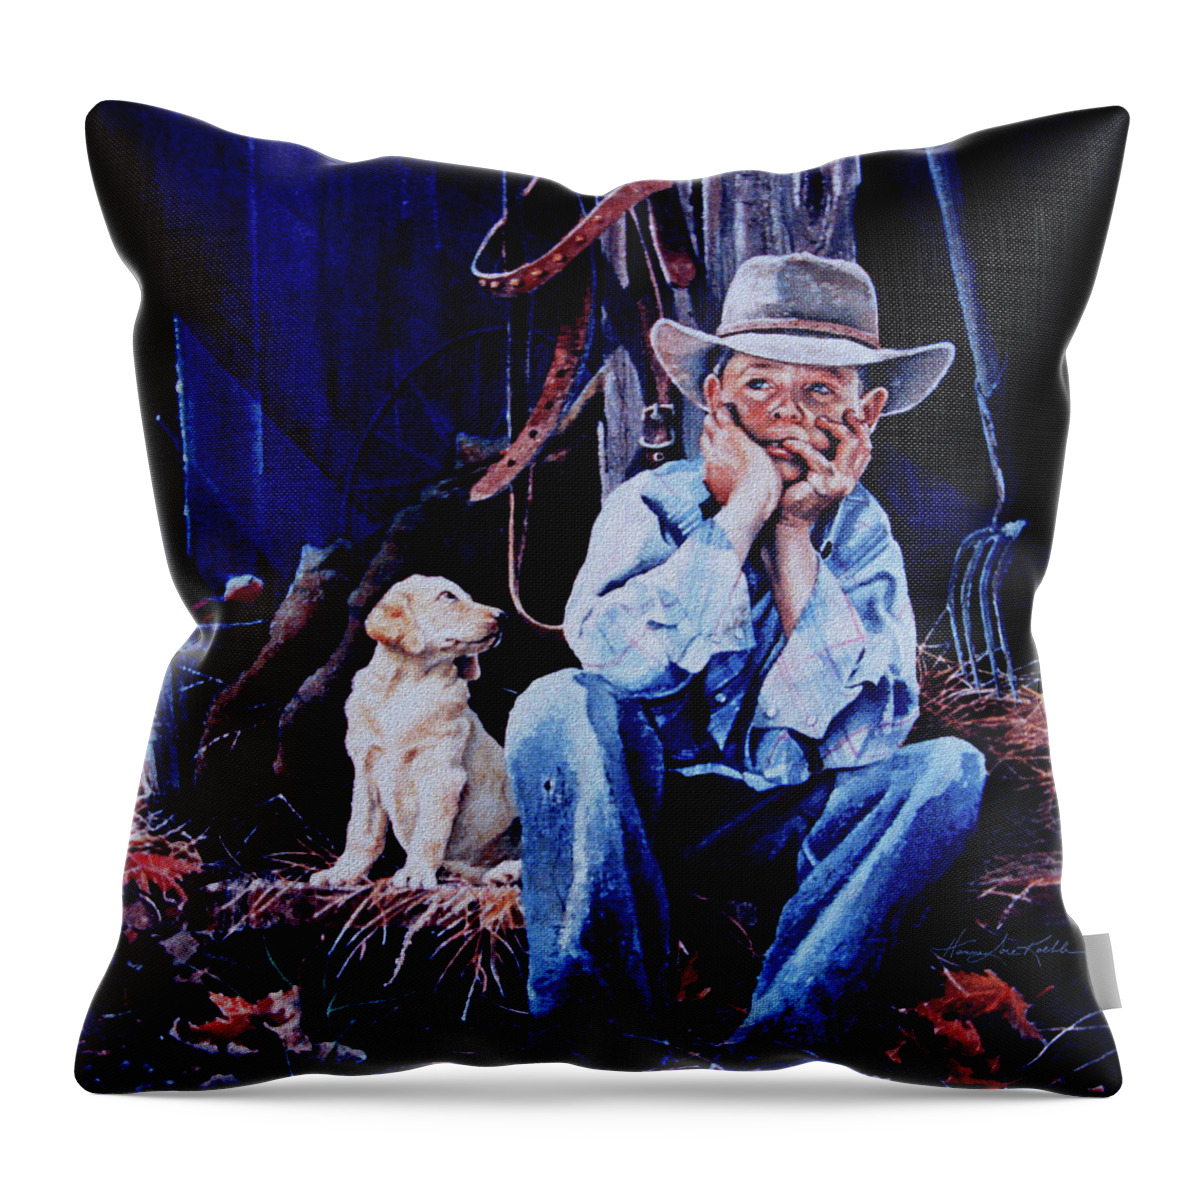 The Dilemma Throw Pillow featuring the painting The Dilemma by Hanne Lore Koehler